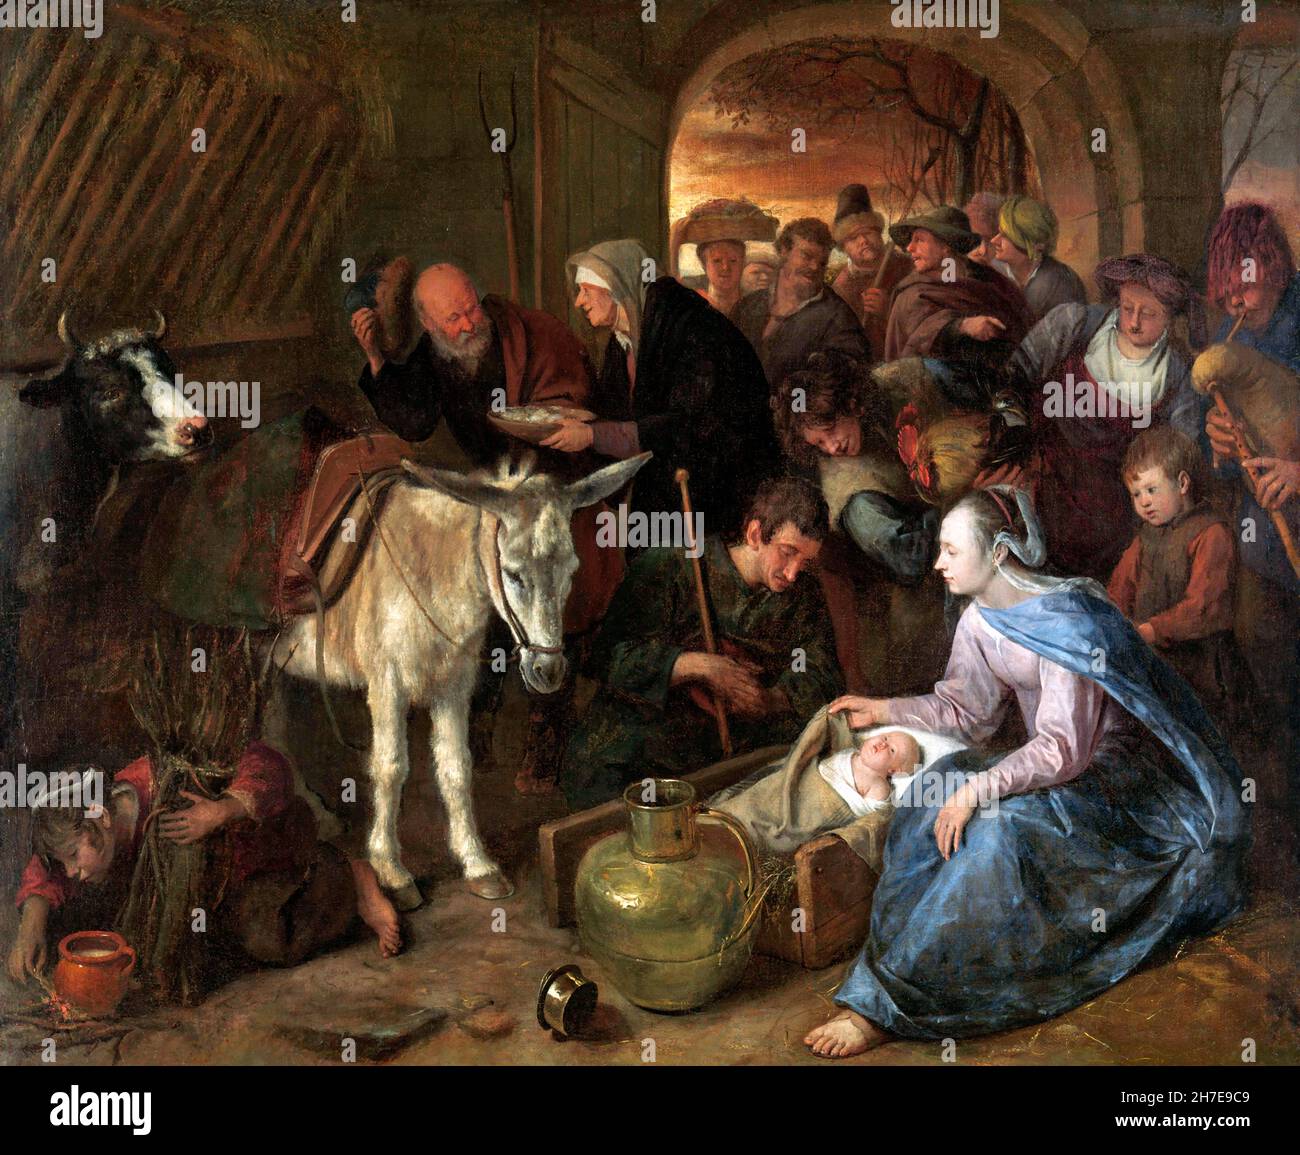 The Adoration of the Shepherds by Jan Steen, oil on canvas, 1660-79 Stock Photo